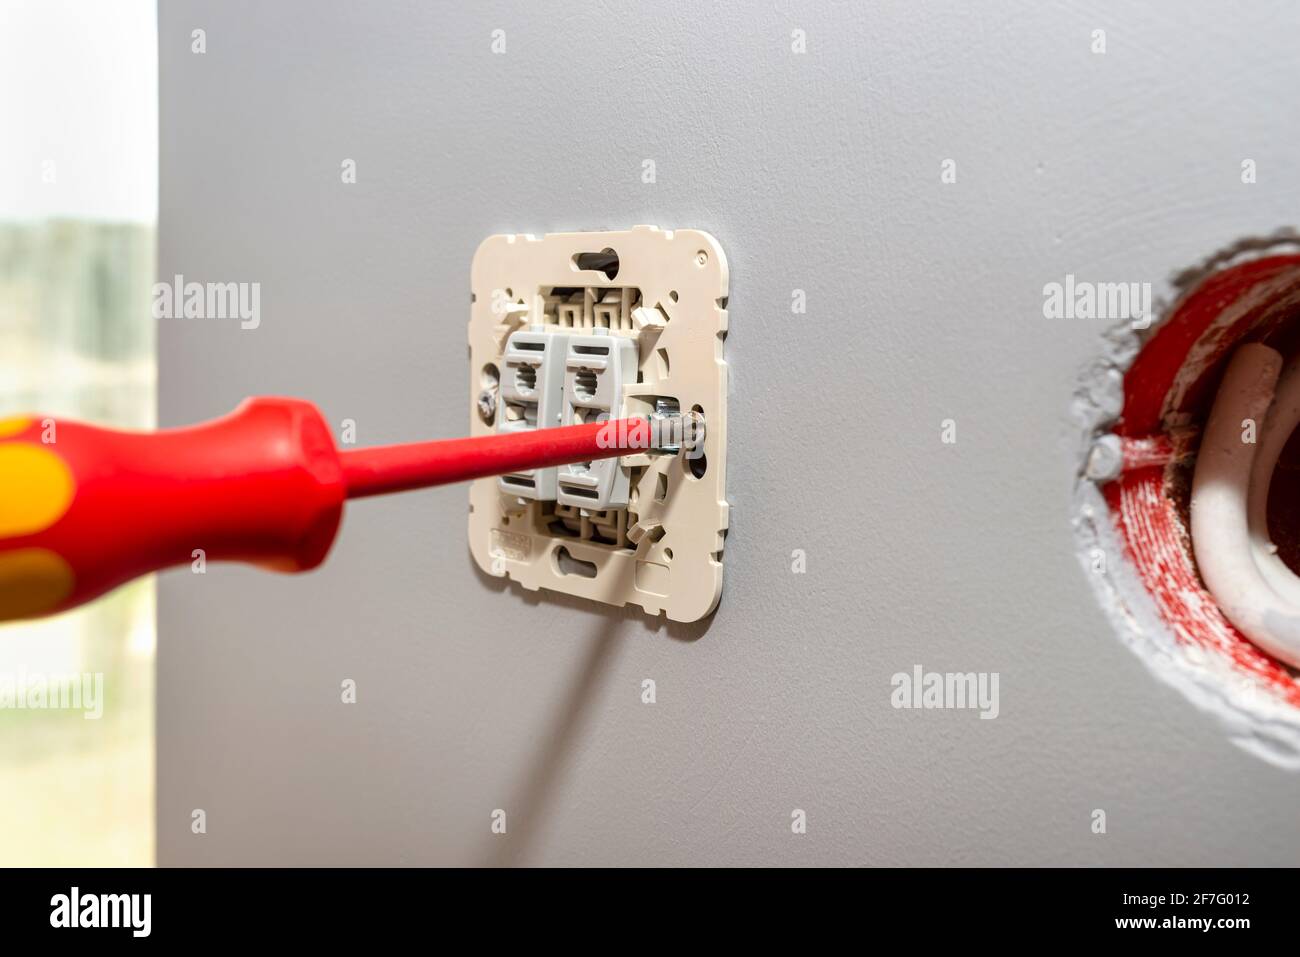 Screwing the switch to the roller shutters up and down with a red screwdriver in the room by the window. Stock Photo